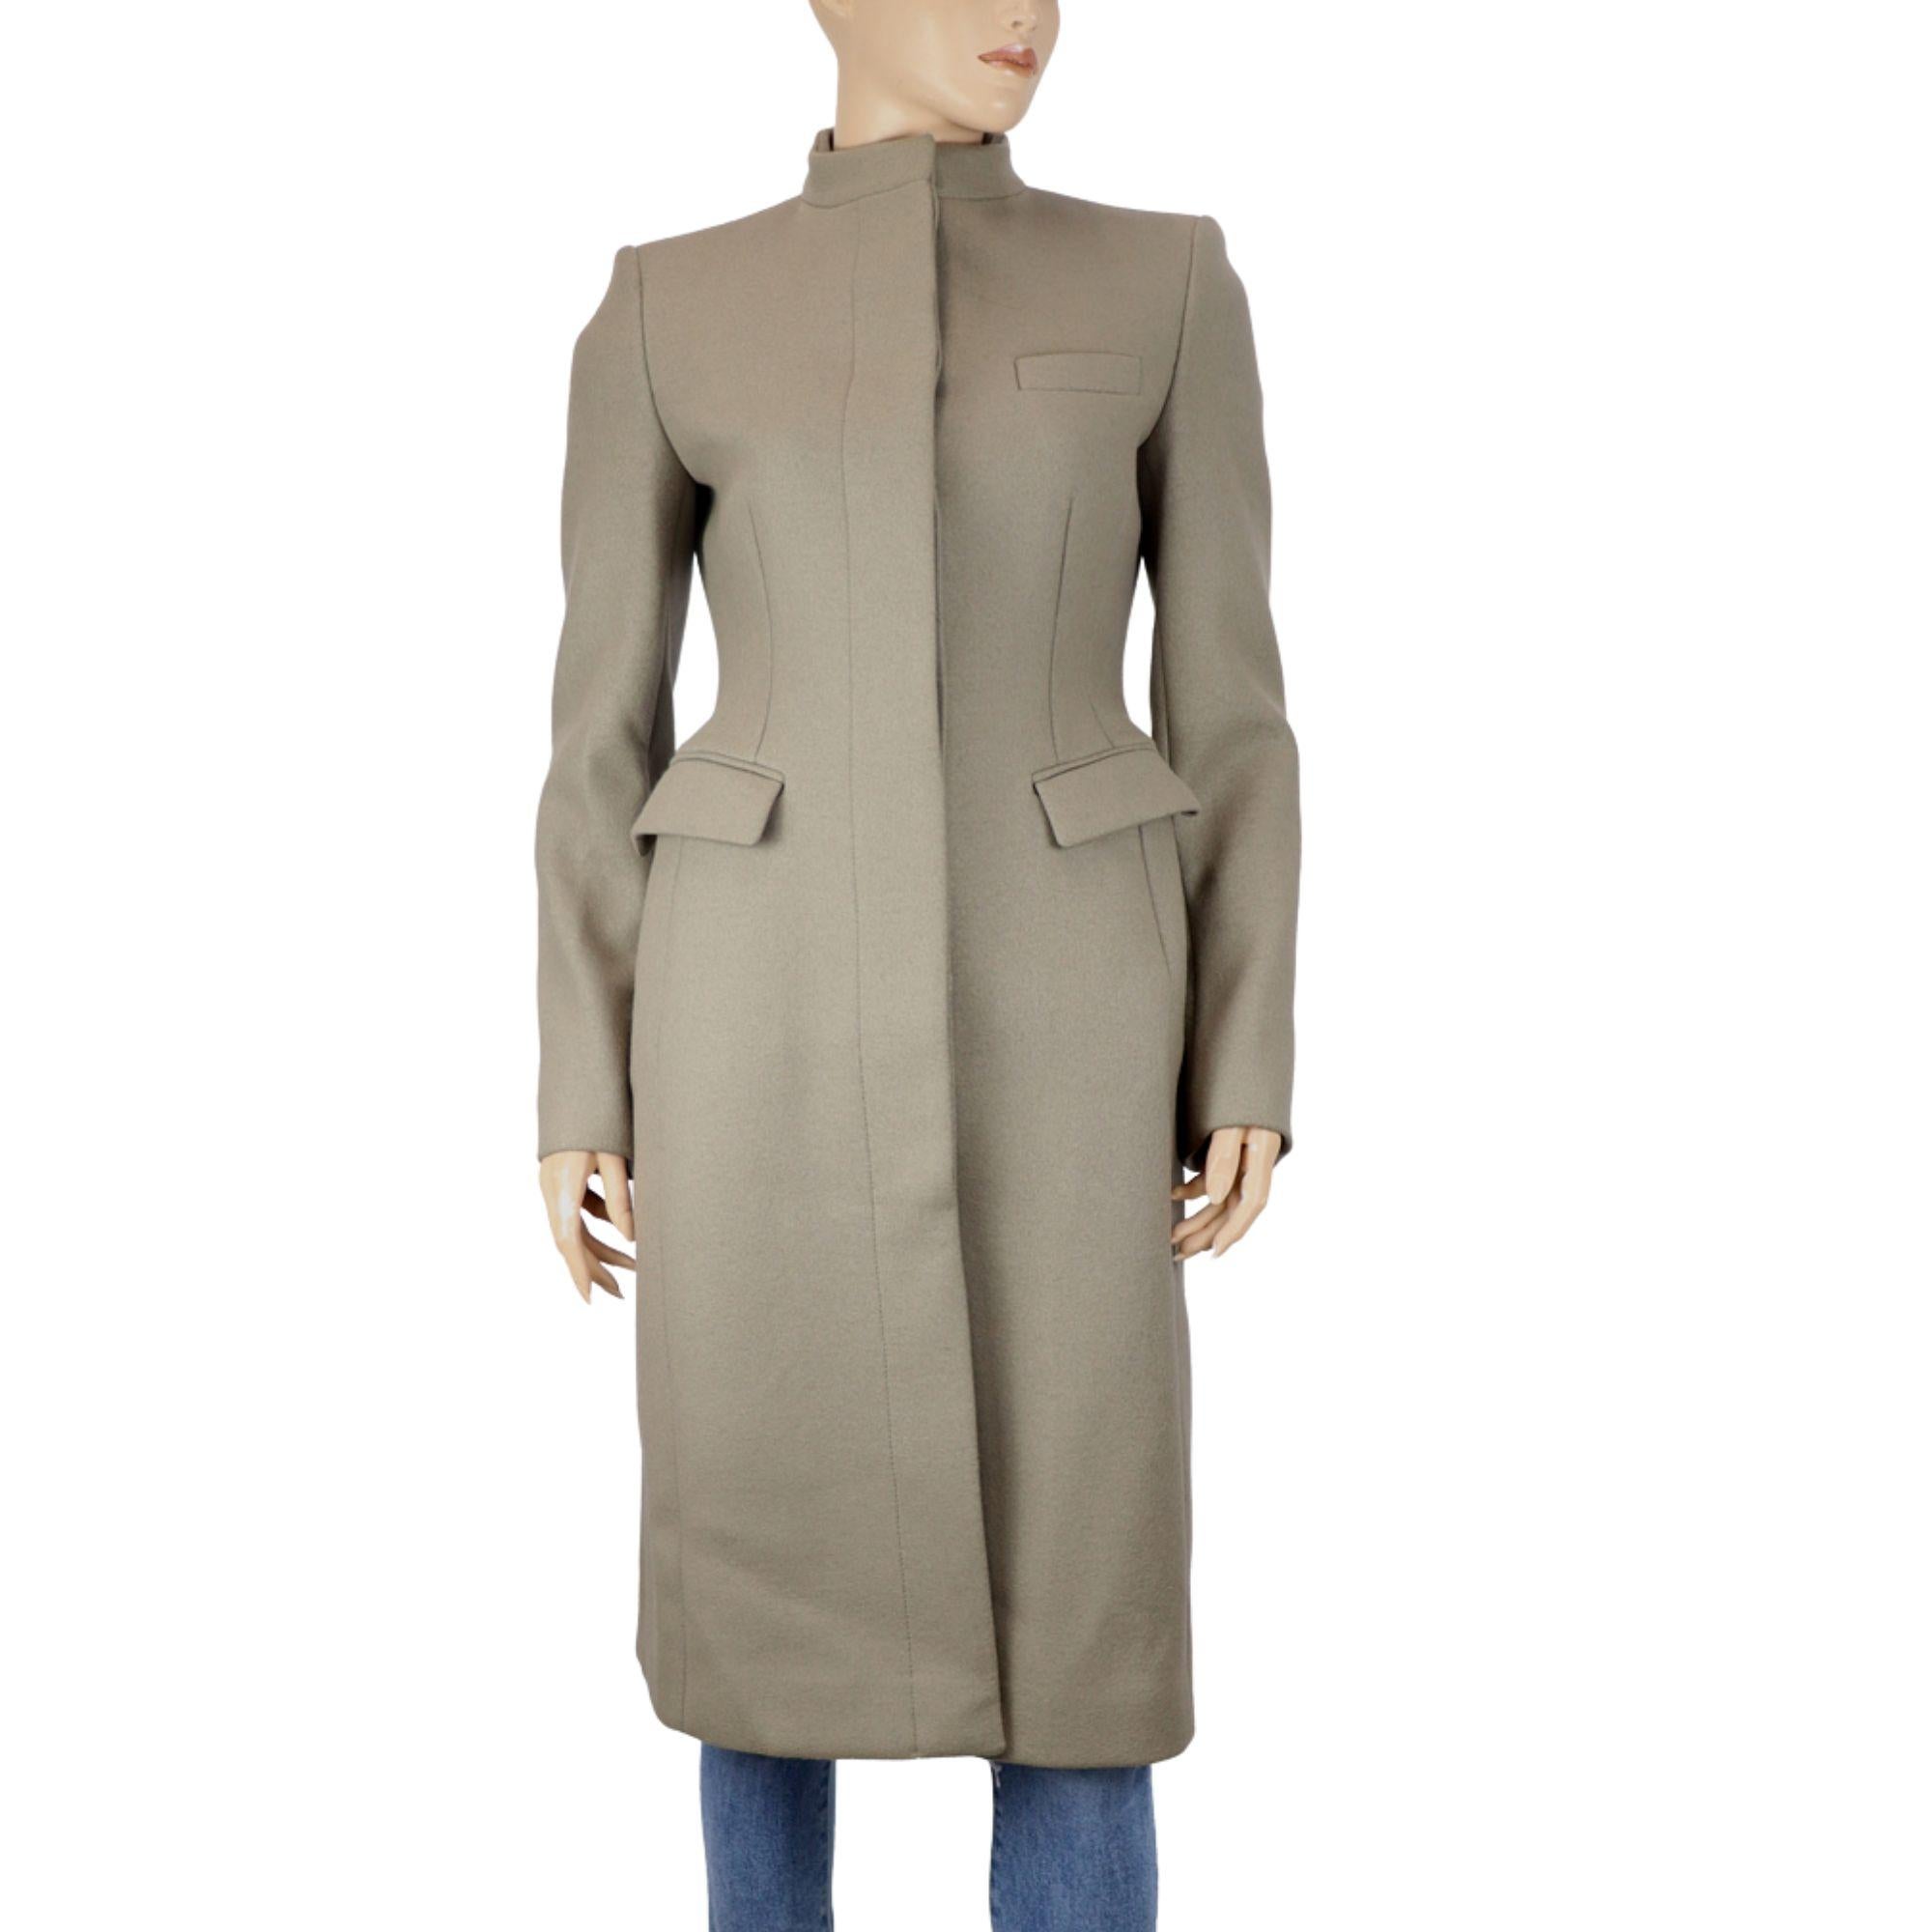 Stella McCartney Beige/ Grey Wool Below the Knee Midi Coat, Cinched waist with pockets and high neck.

Material: Wool
Condition Overall: New With Tags
Tag Size IT 40
Shoulder Width 42cm
Bust: 93m 
Waist: 75cm
Hips: 100cm
Length: 105cm
Side Seam